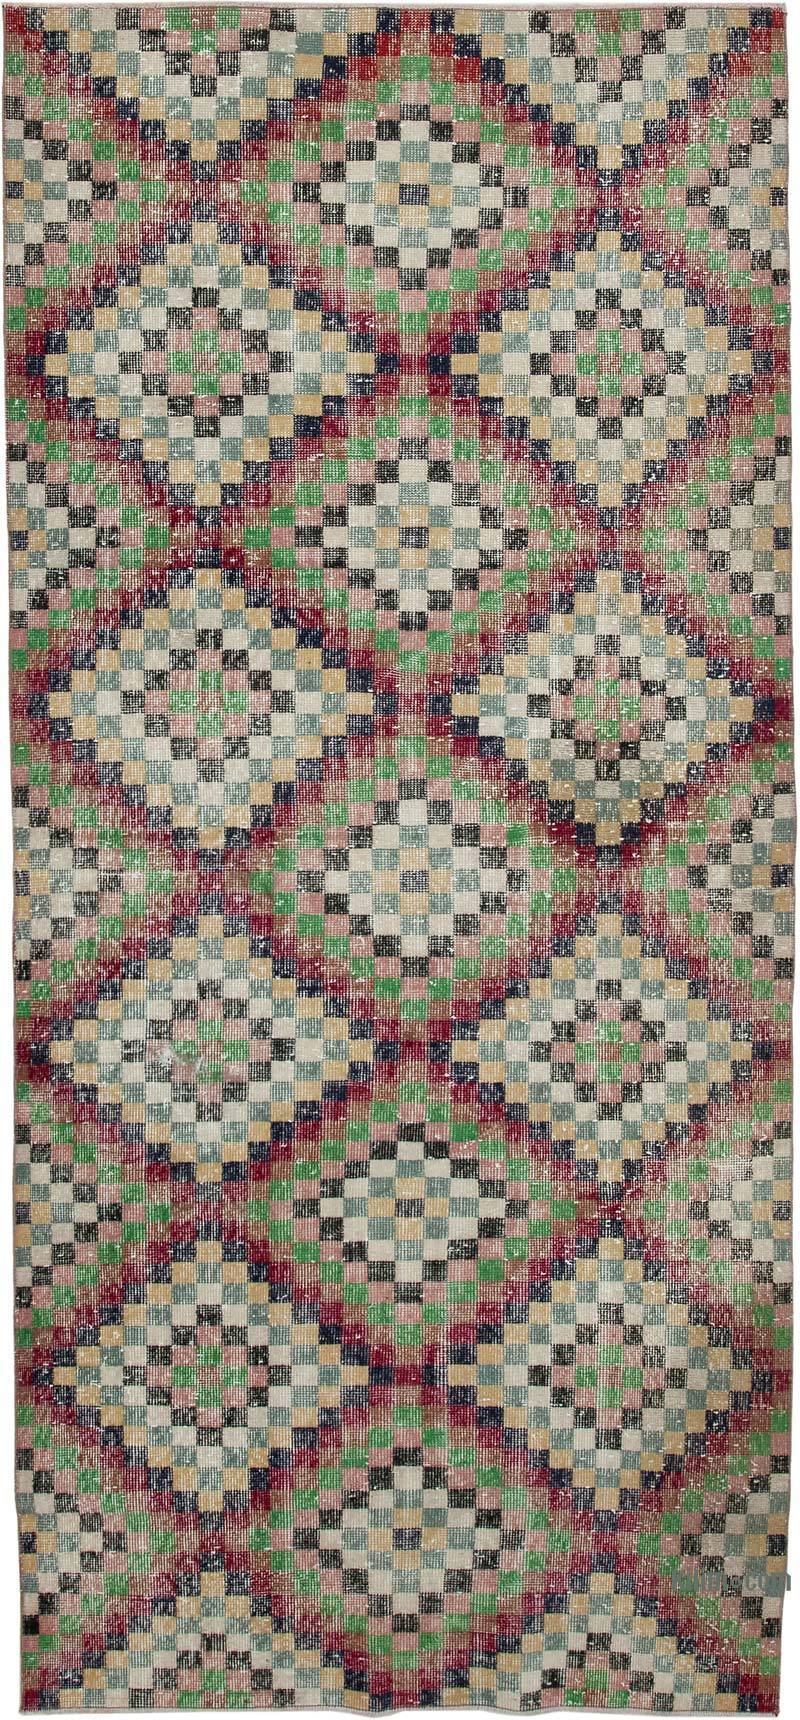 Retro Hand-Knotted Vintage Runner - 4' 6" x 10'  (54" x 120") - K0038147